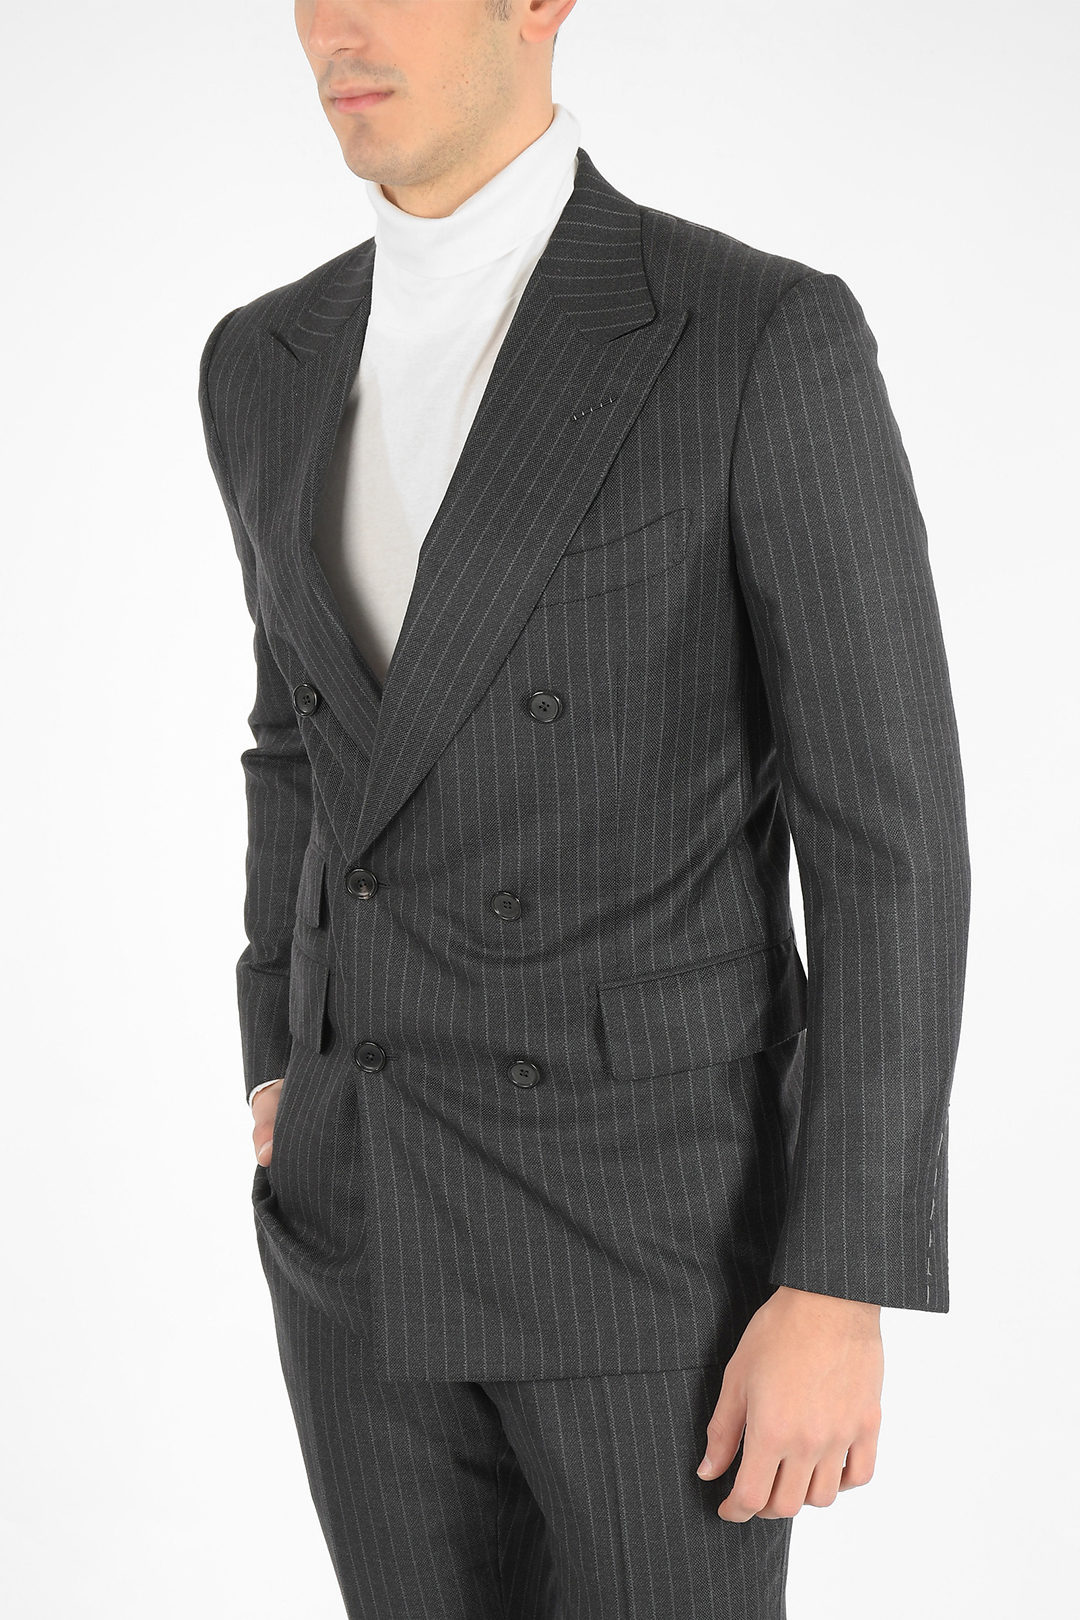 Tom Ford pinstriped center vent peak lapel 3-button double breasted SHELTON  suit drop 7R men - Glamood Outlet